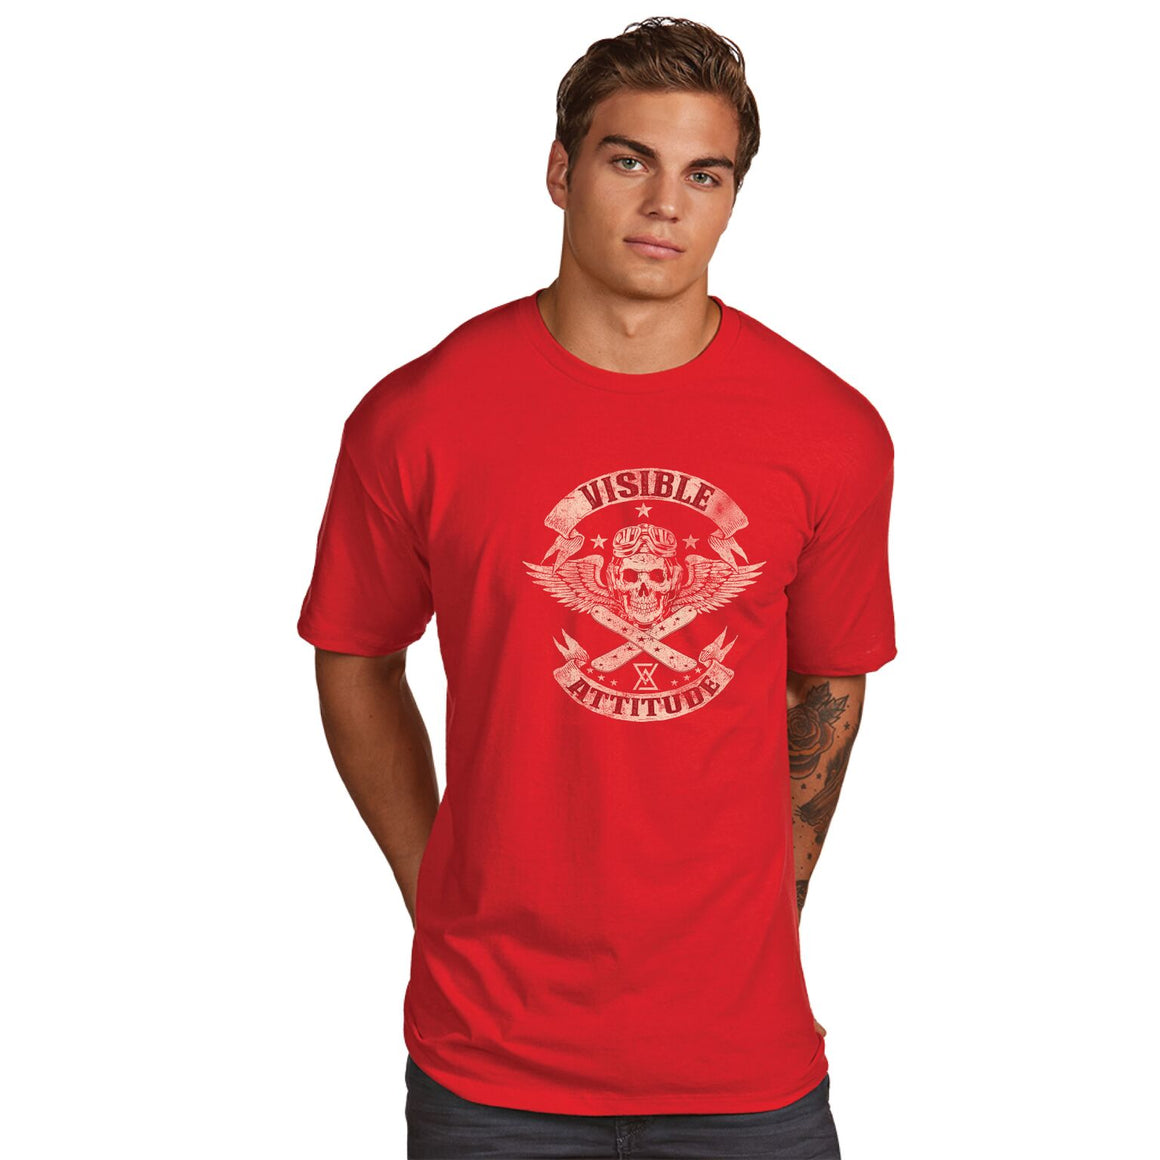 Visible Attitude "Skull Snowboard" T-Shirt - Suited Poker Gear